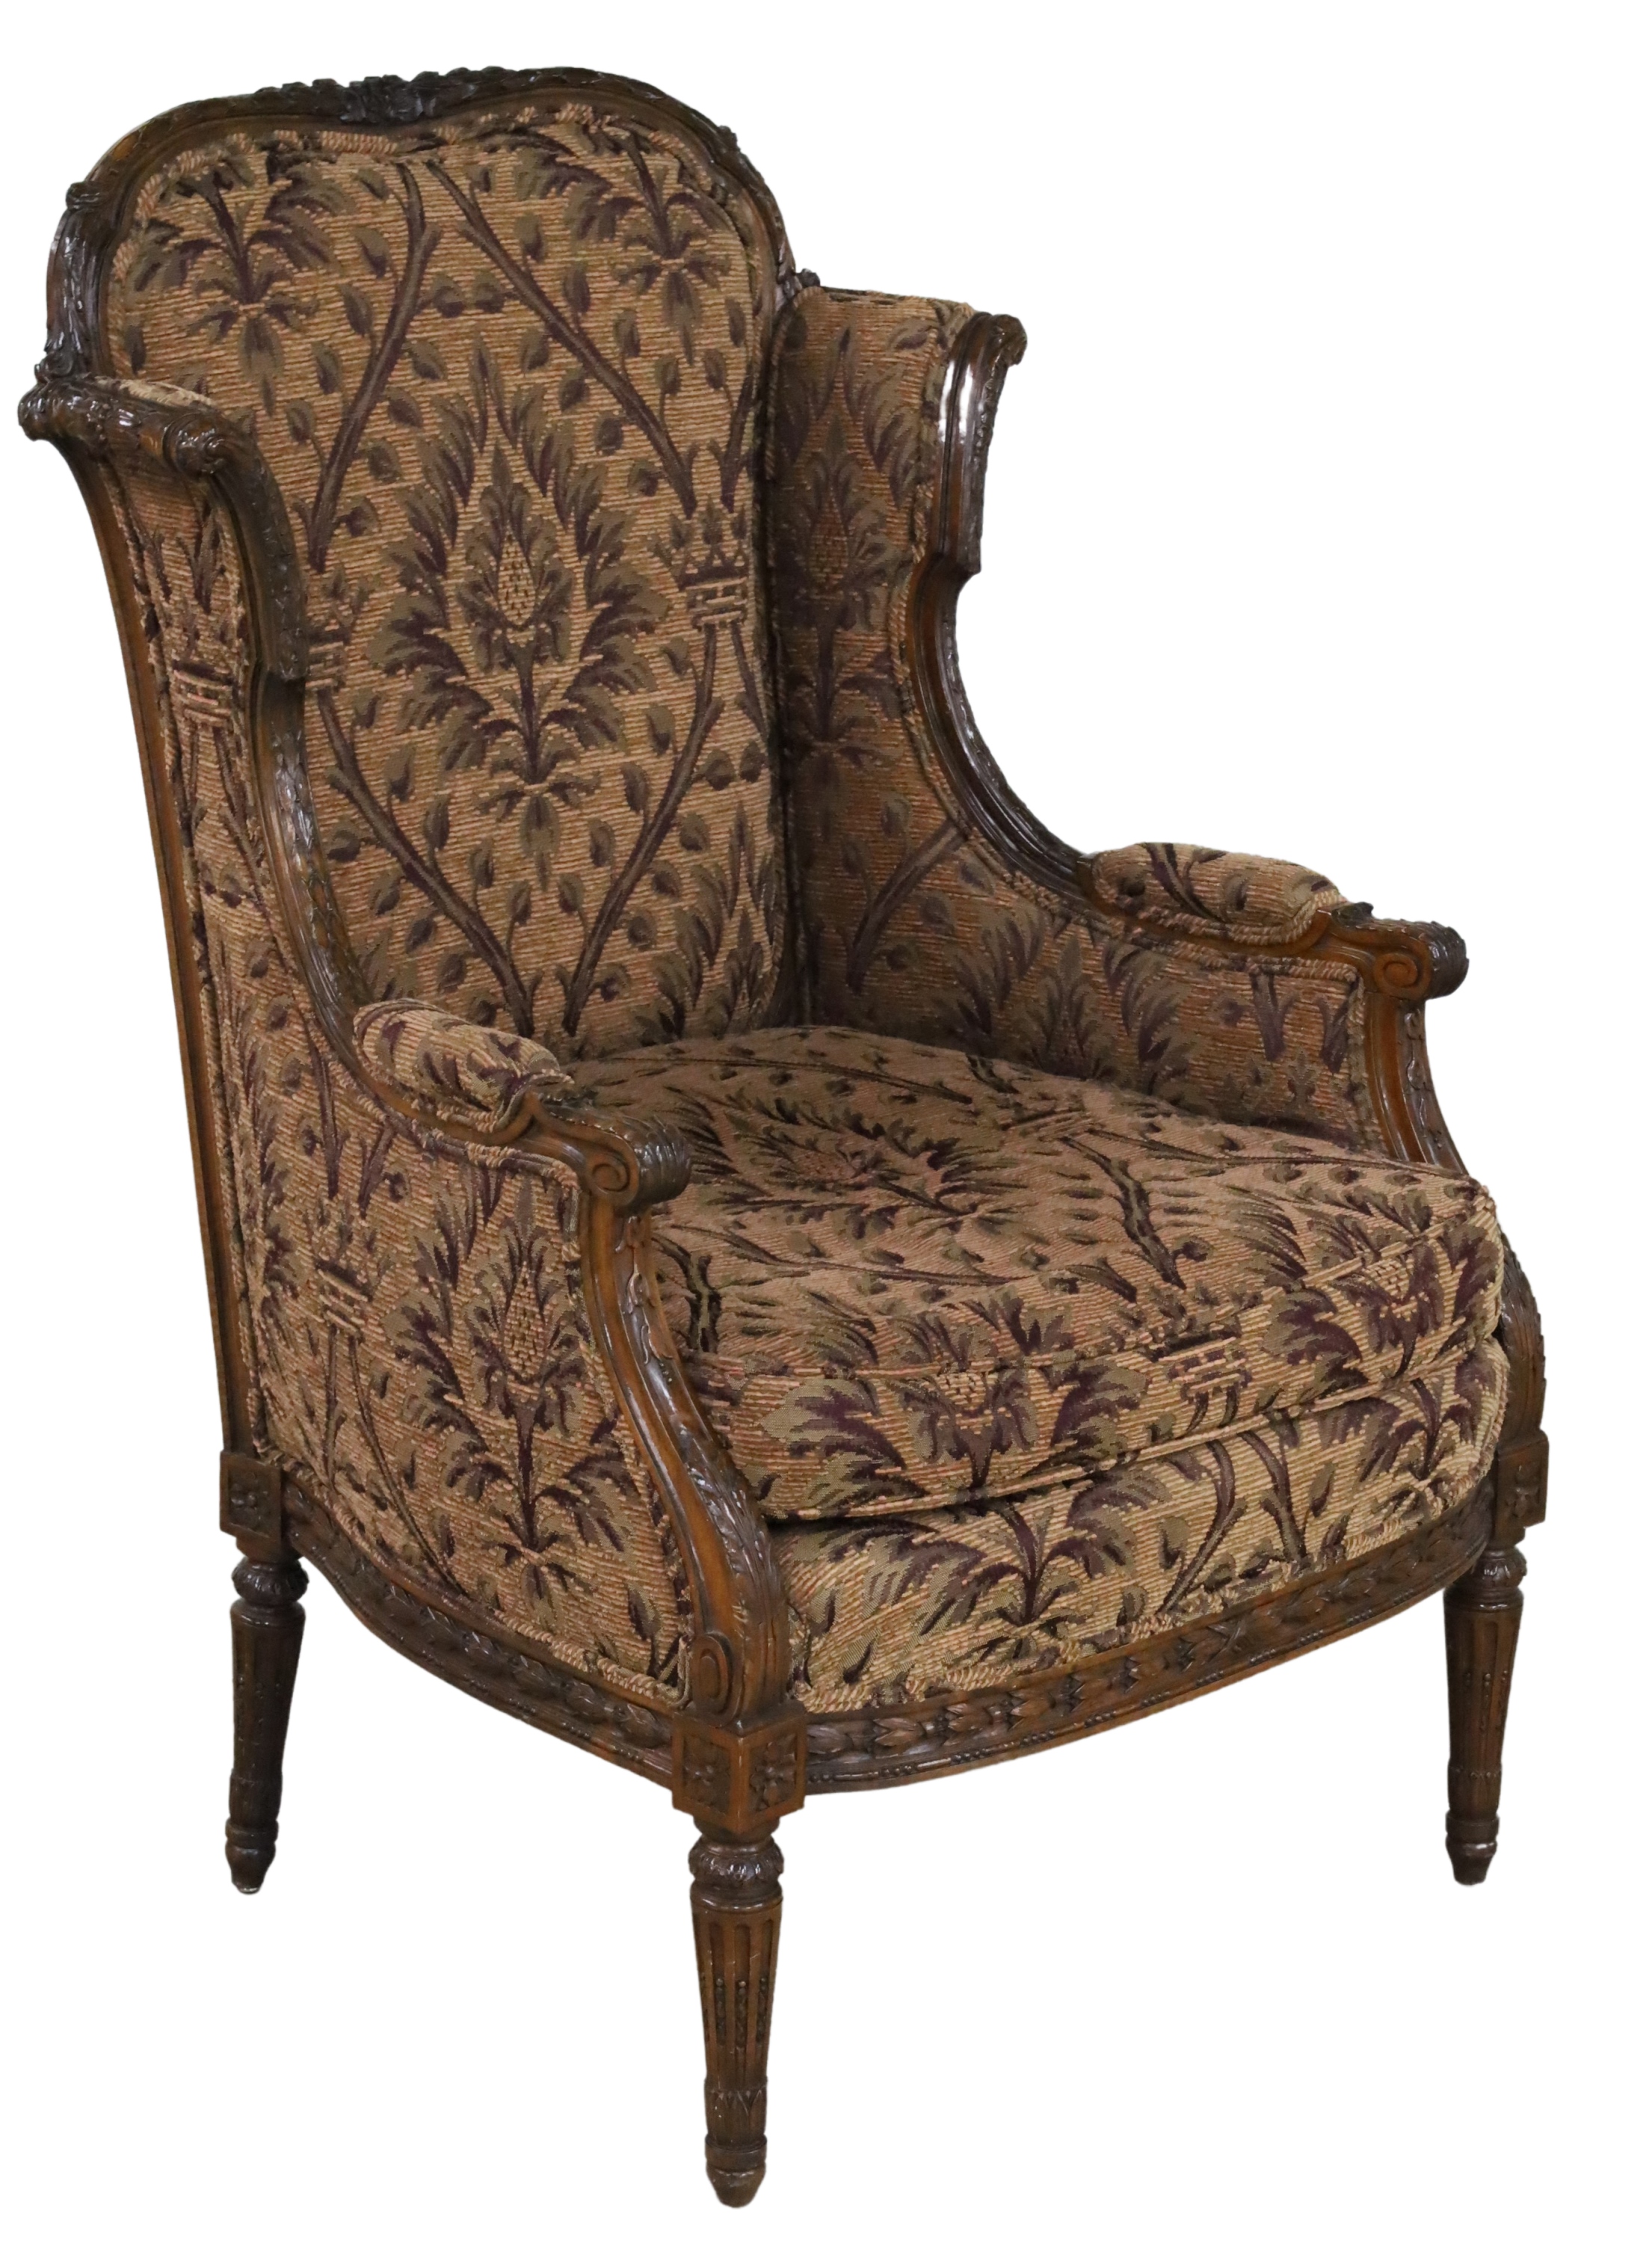 LOUIS XVI STYLE BERGERE Handsome